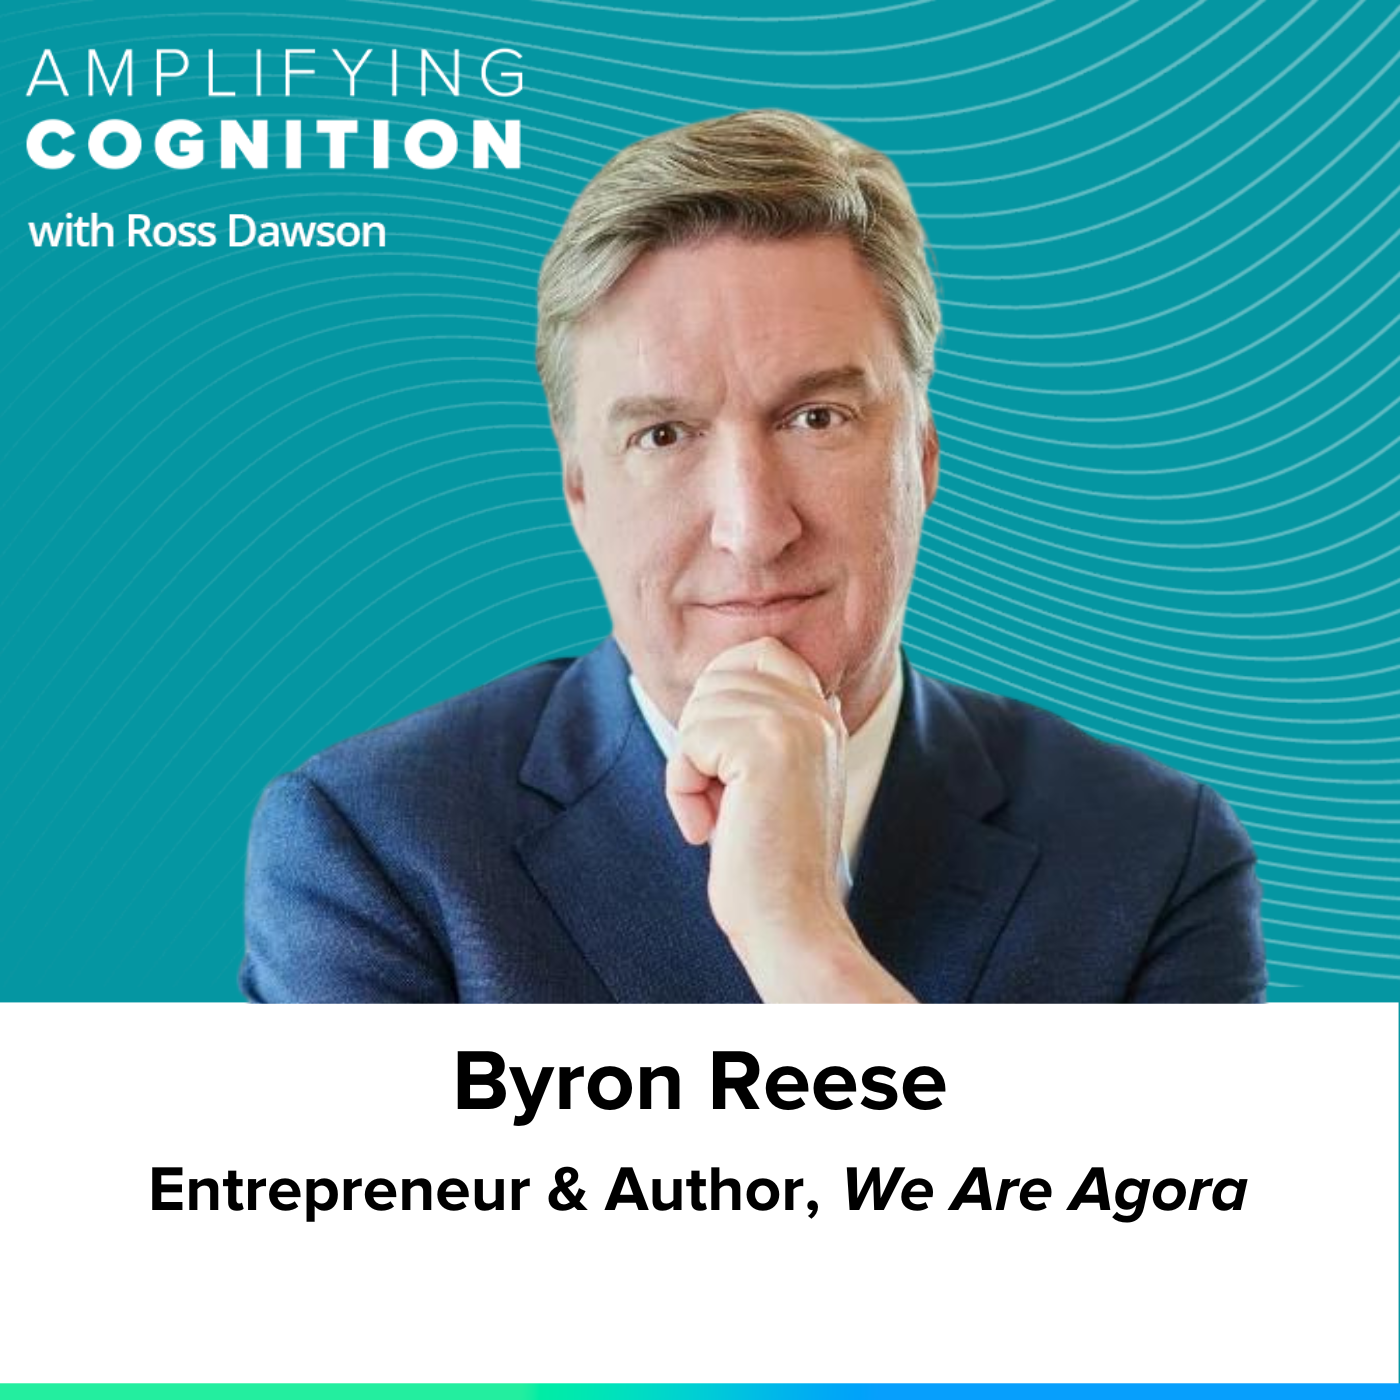 Byron Reese on the human superorganism, collective intelligence, saving humanity, and being kinder (AC Ep23)